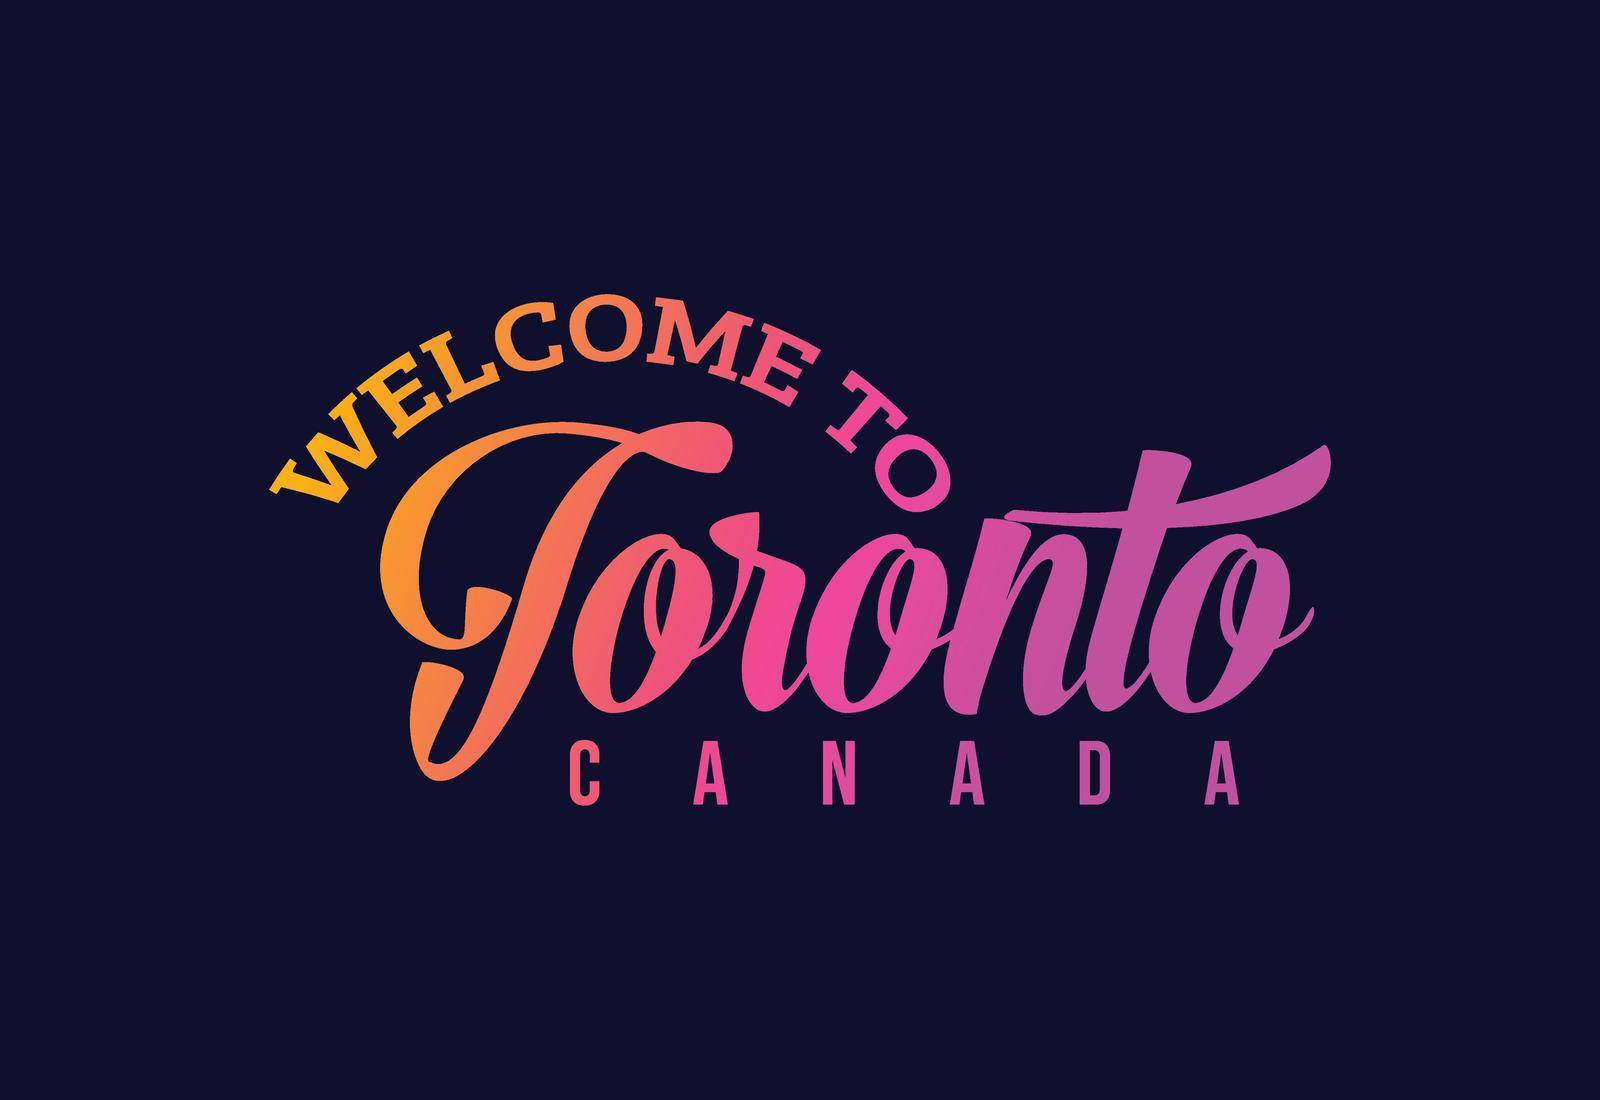 Welcome To Toronto. Canada Word Text Creative Font Design Illustration. Welcome sign